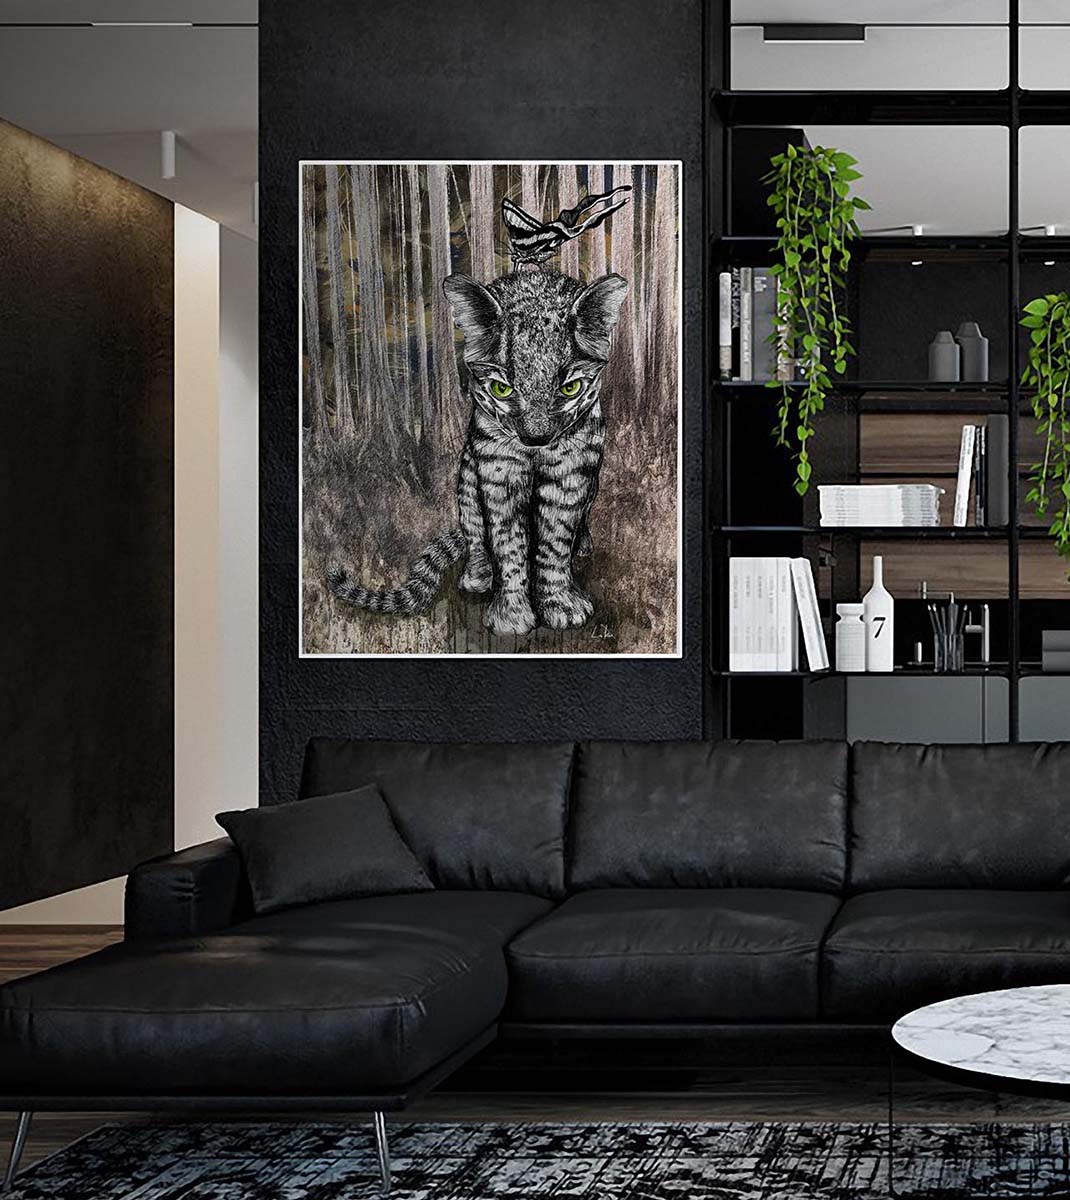 Jungle Kitty and Butterfly mixed media art by Doug LaRue on a living room wall